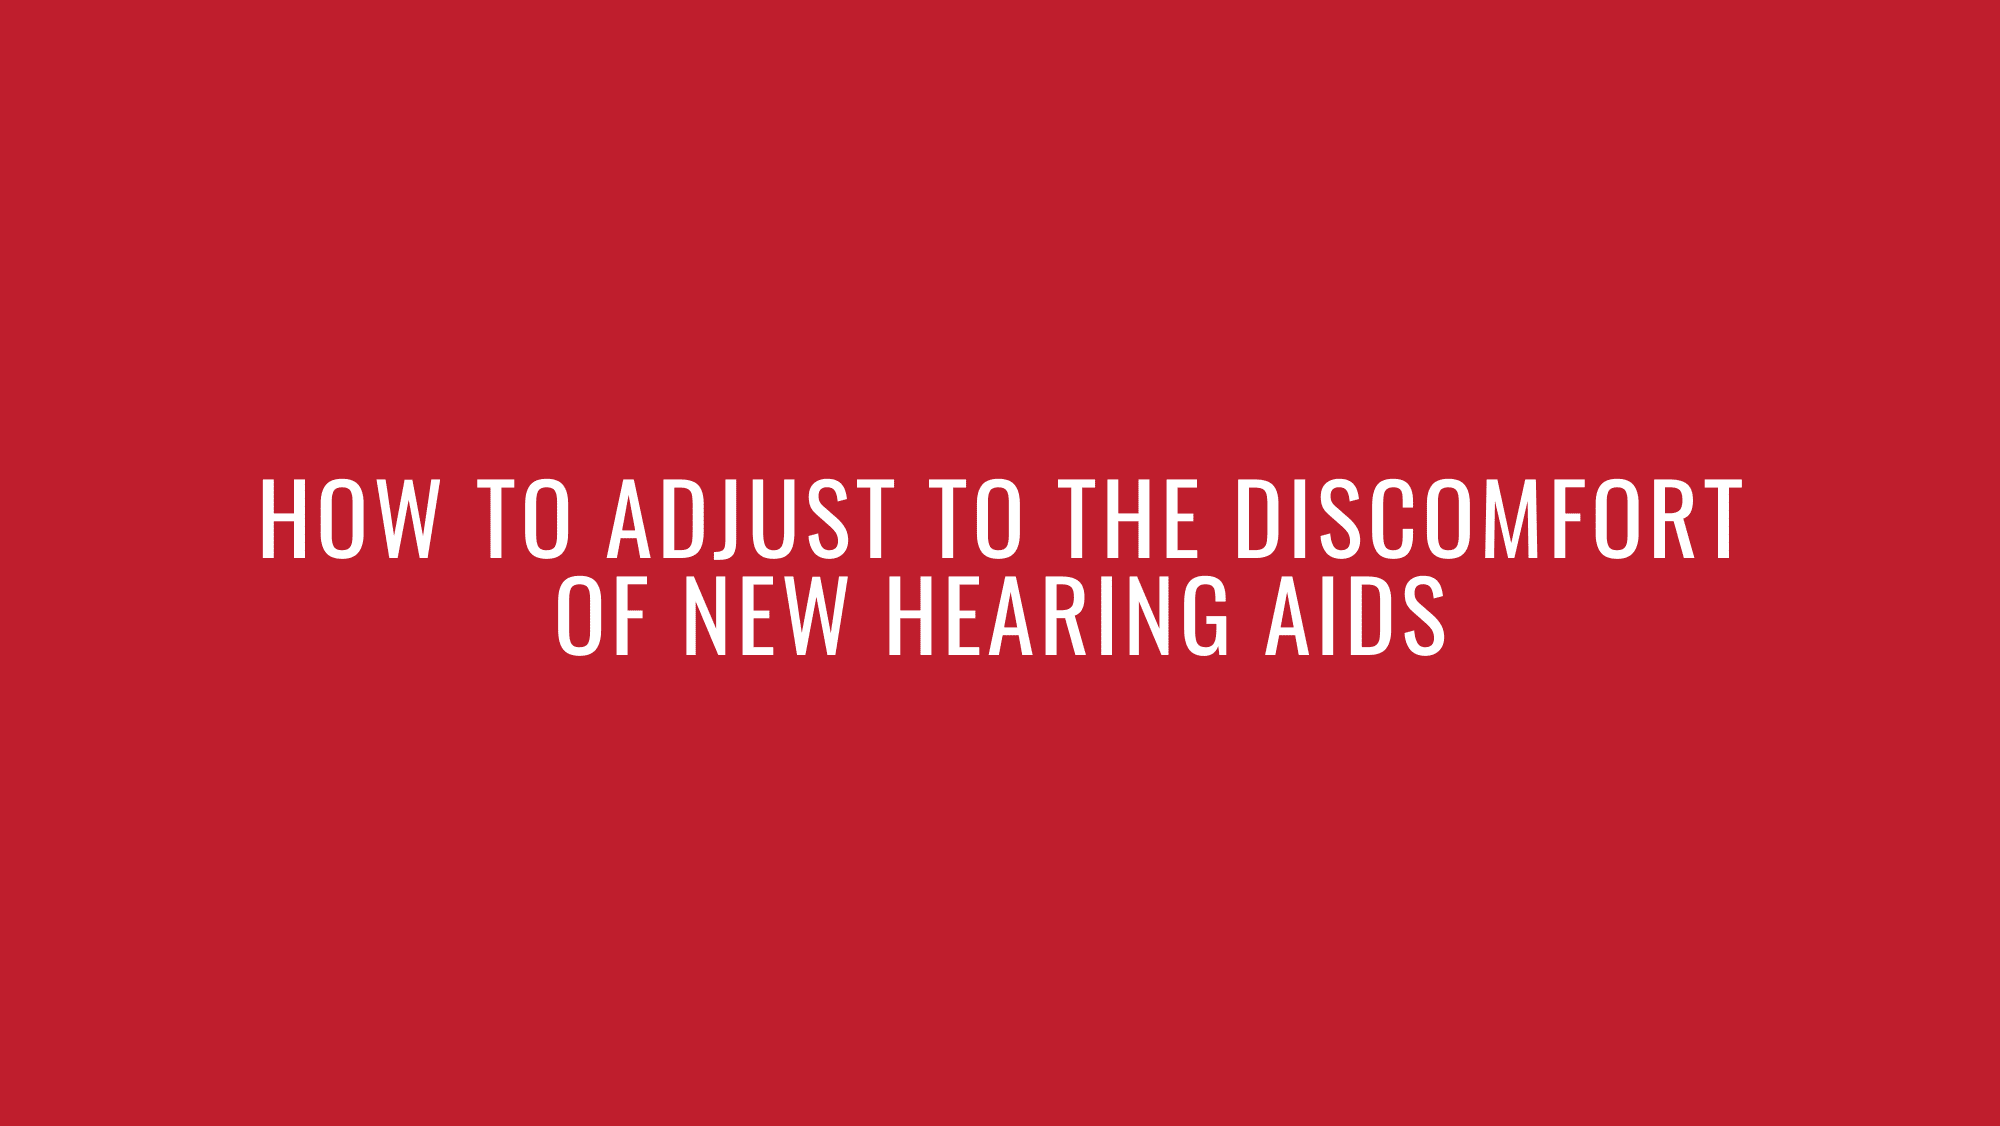 How to Adjust to the Discomfort of New Hearing Aids